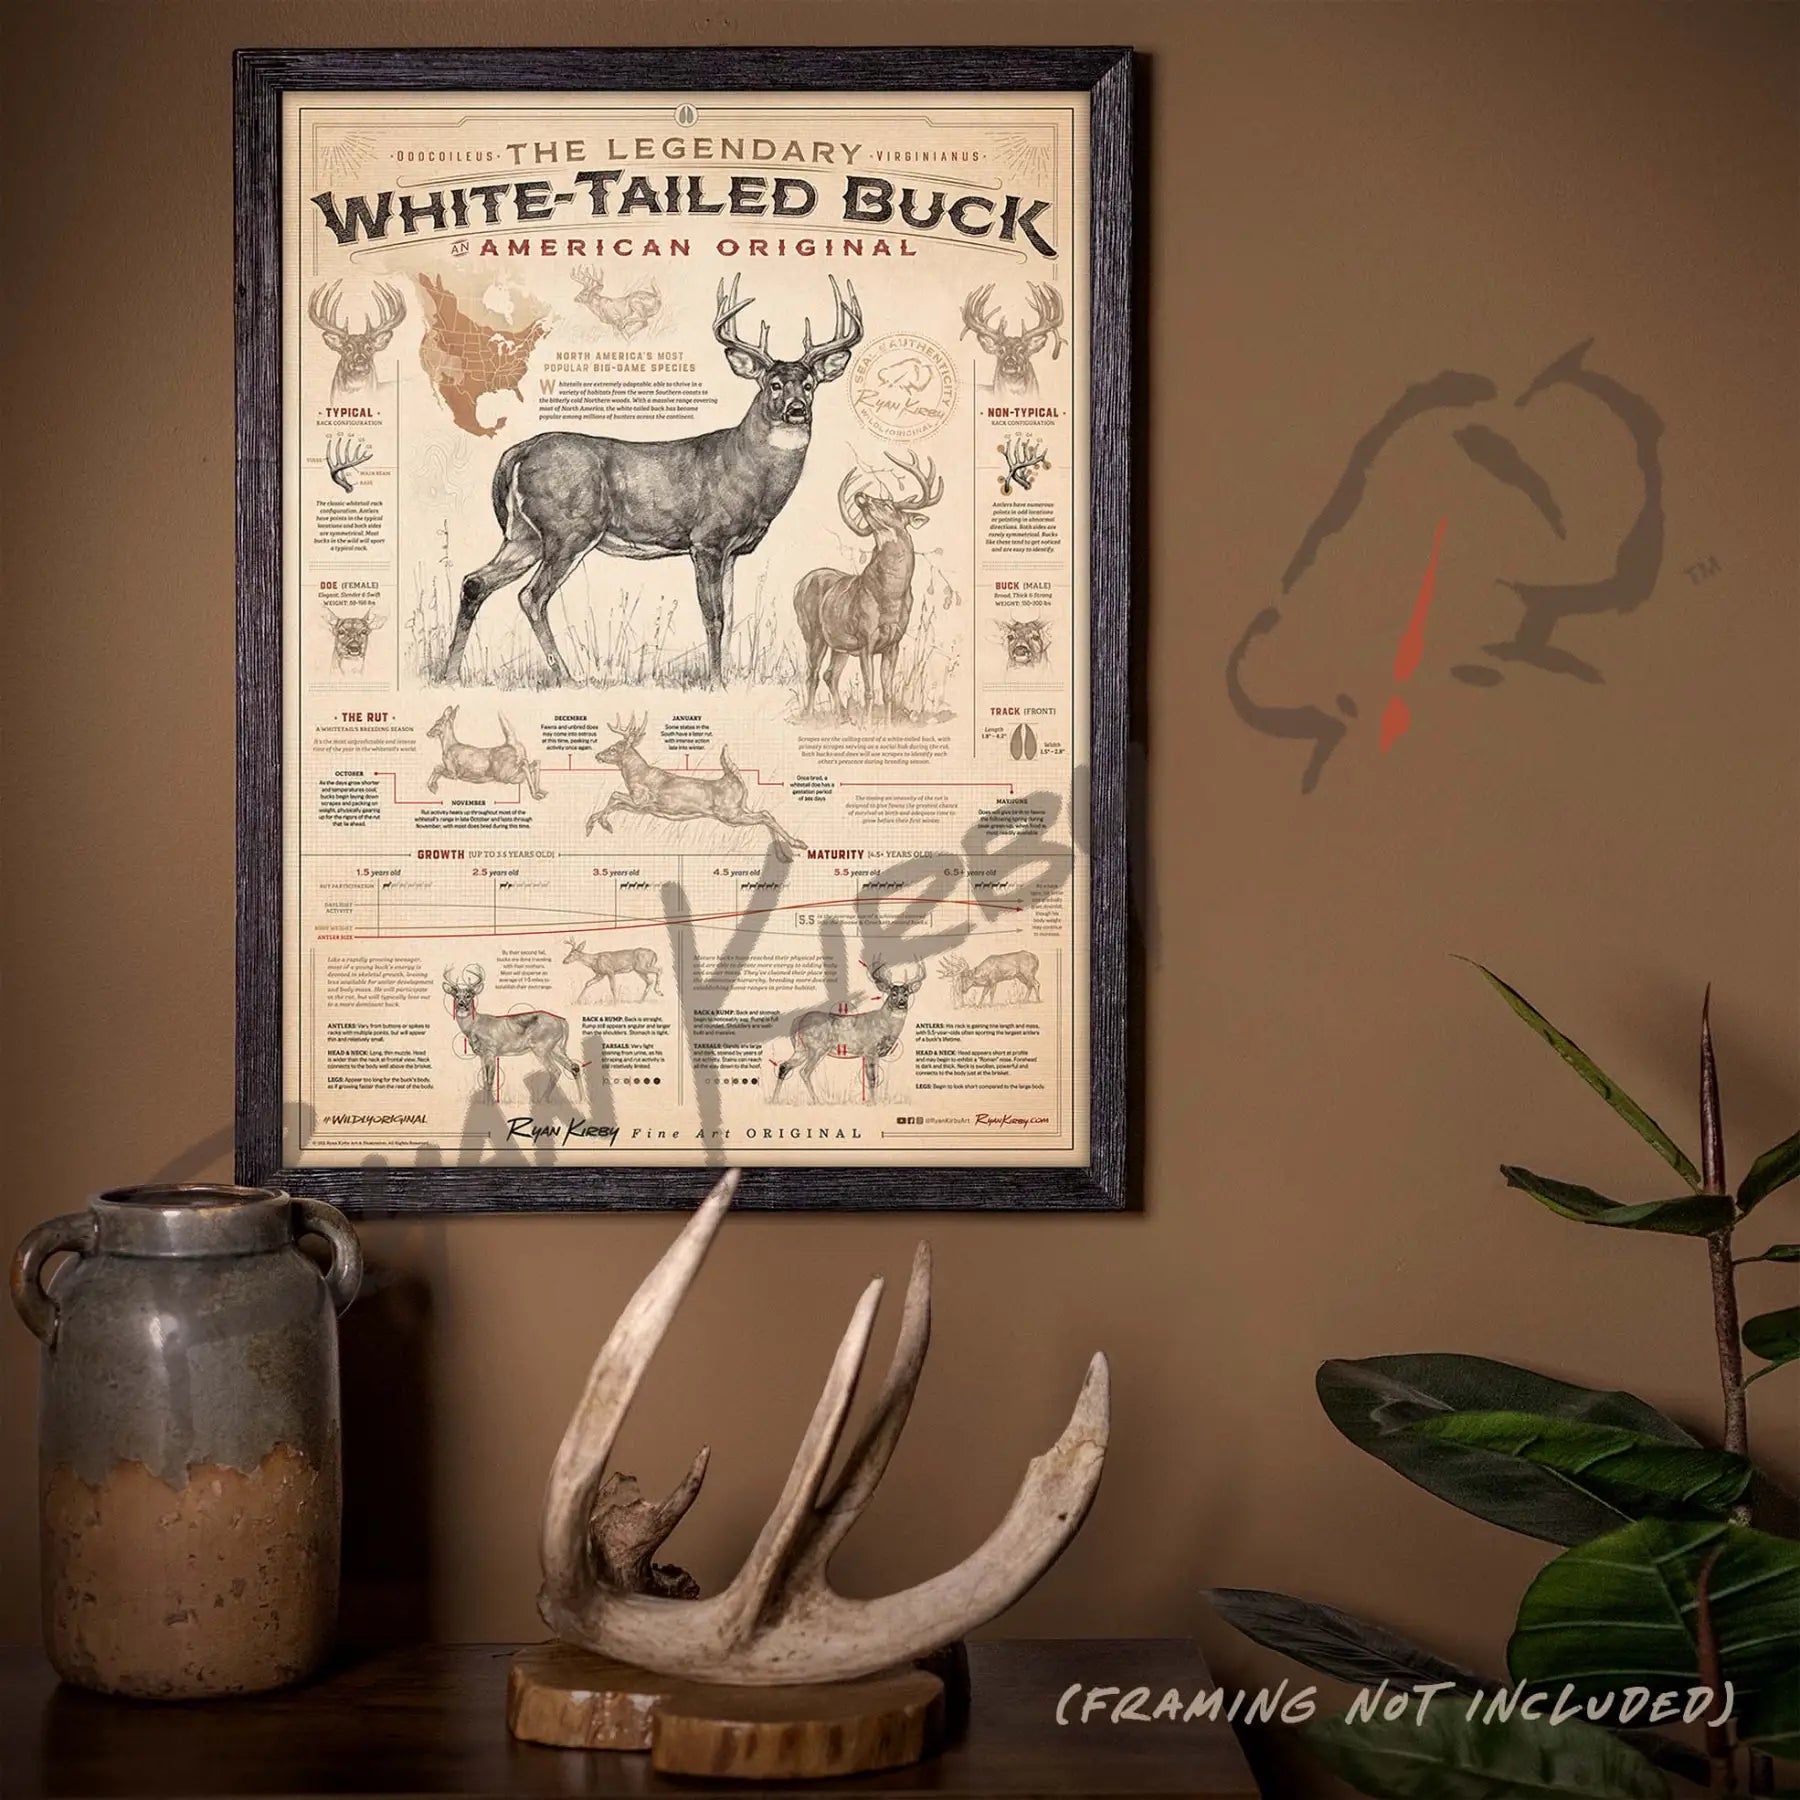 ’White-Tailed Buck: An American Original’ Poster